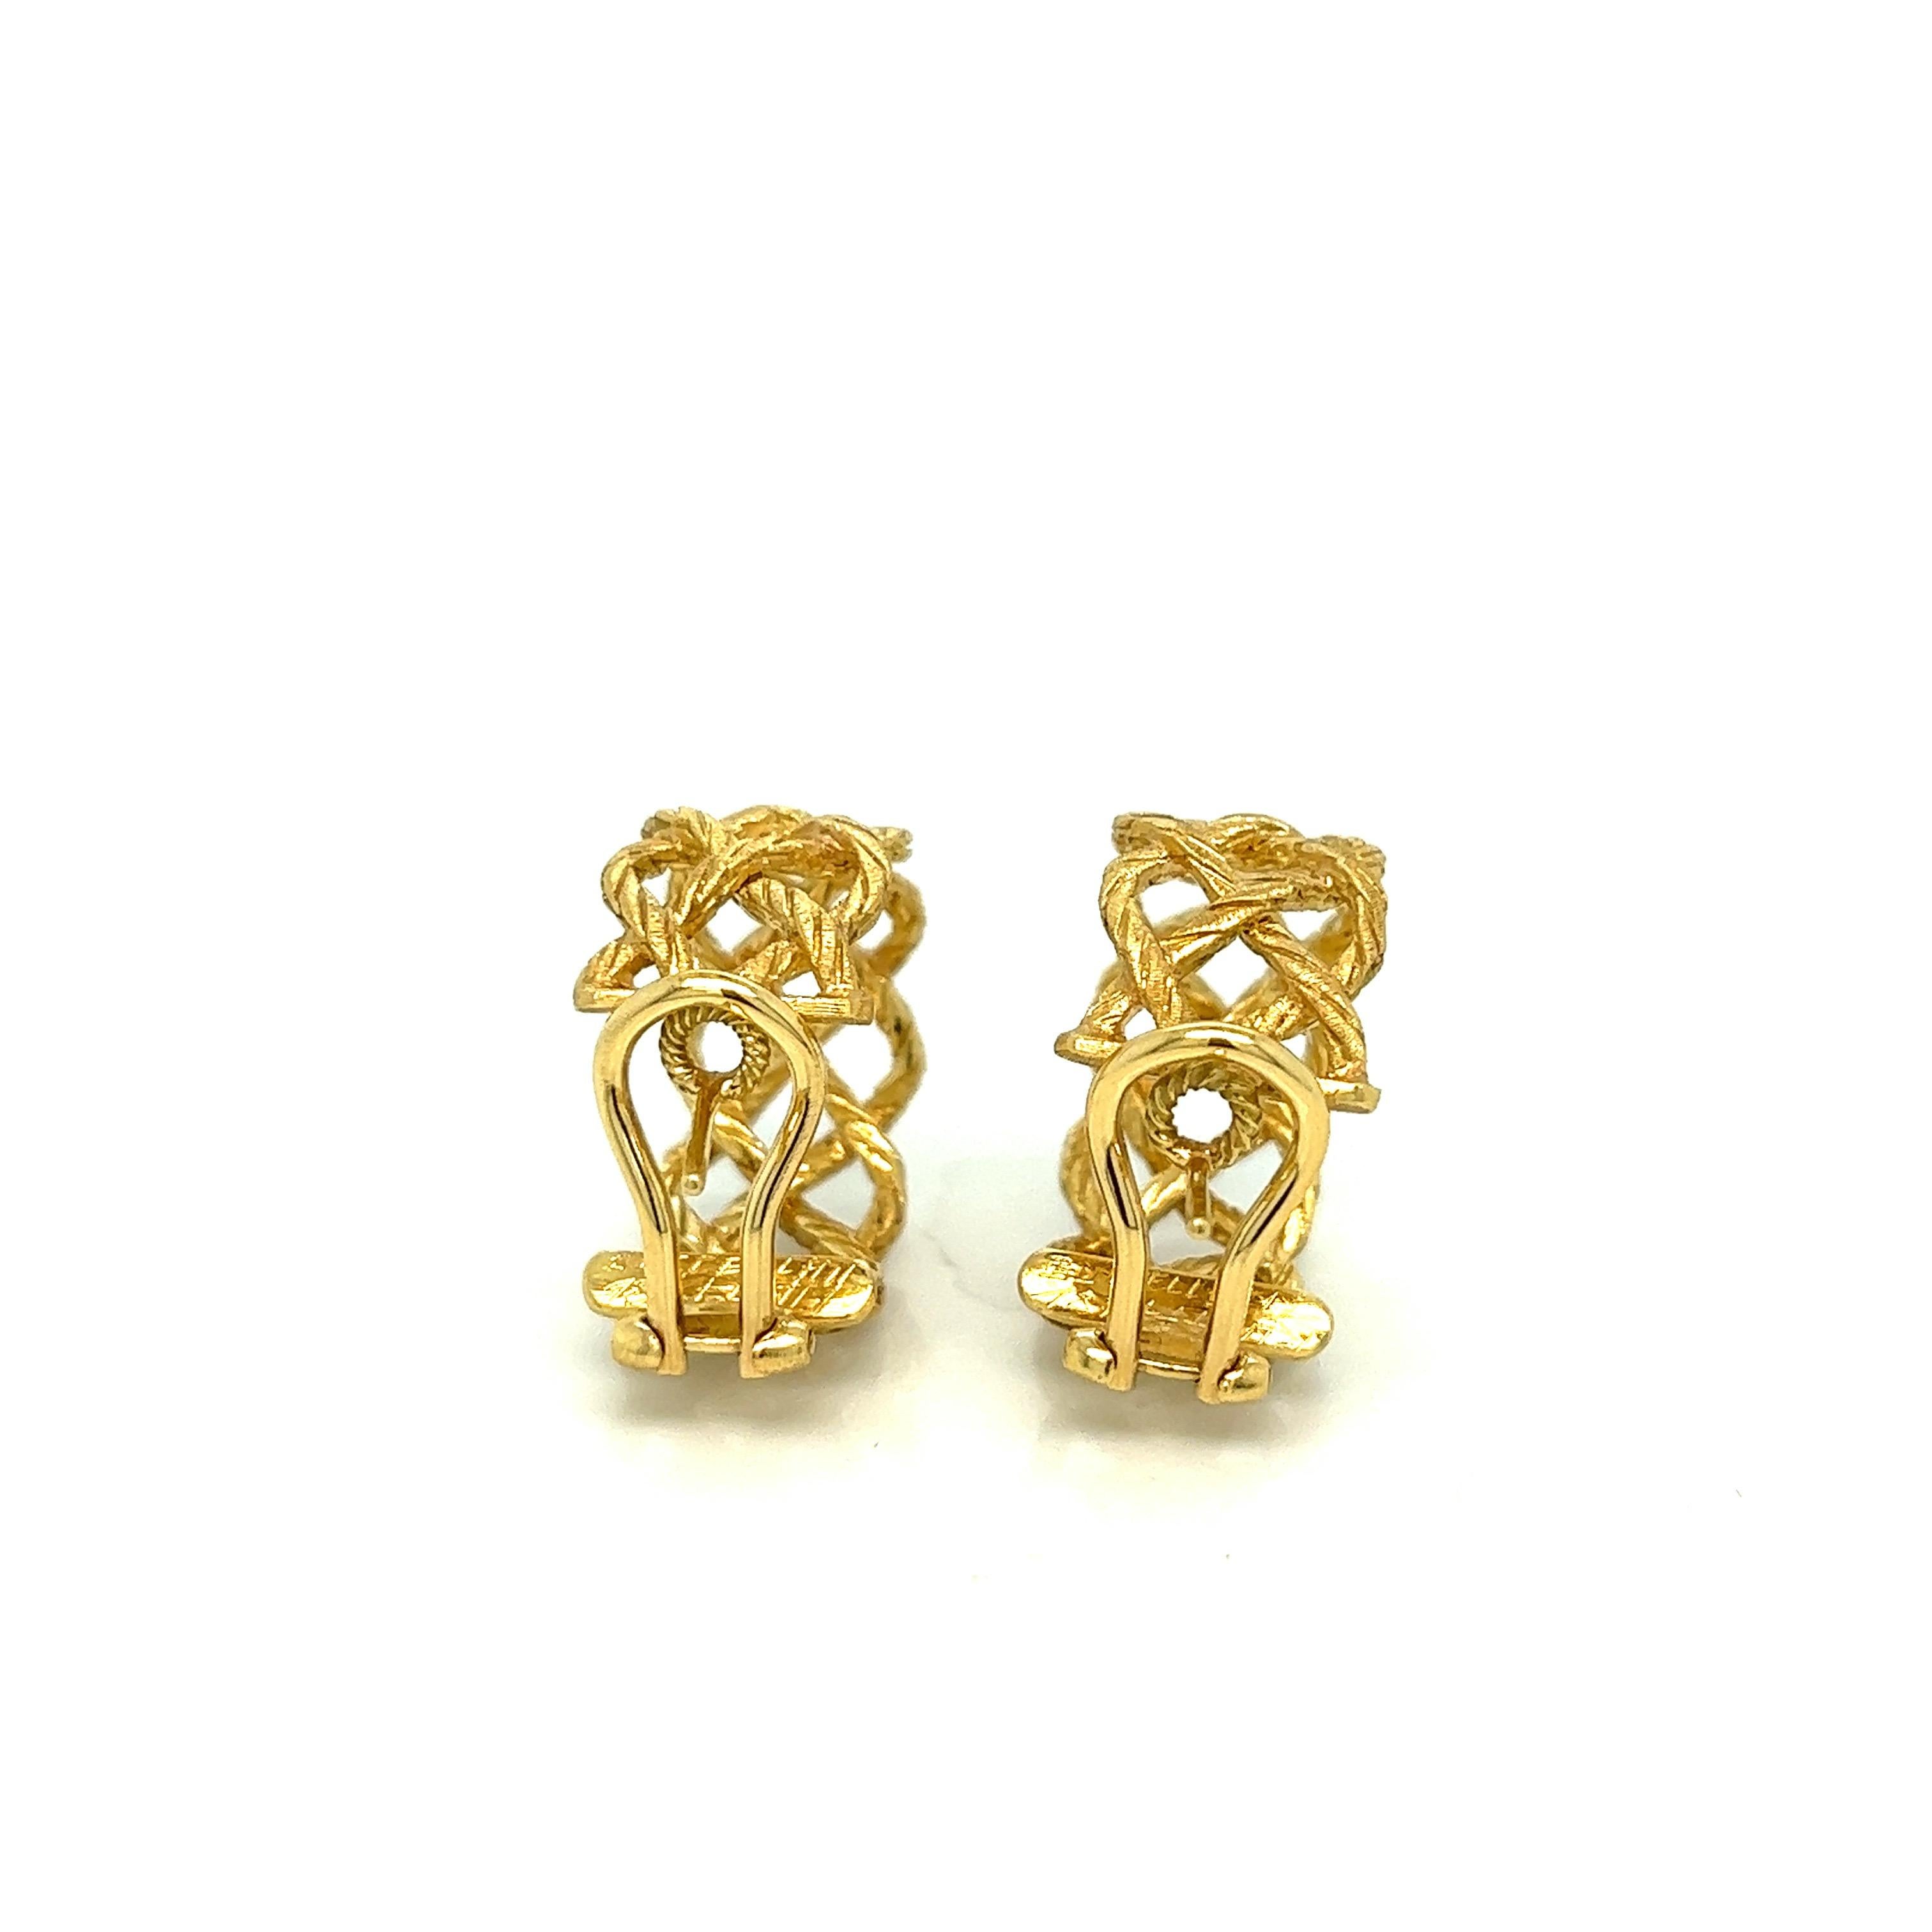 Buccellati gold braided earrings

18 karat yellow gold with a braided motif; marked Buccllati, 18kt, Italy

Size: width 1.1 cm, length 2.2 cm
Total weight: 14.9 grams